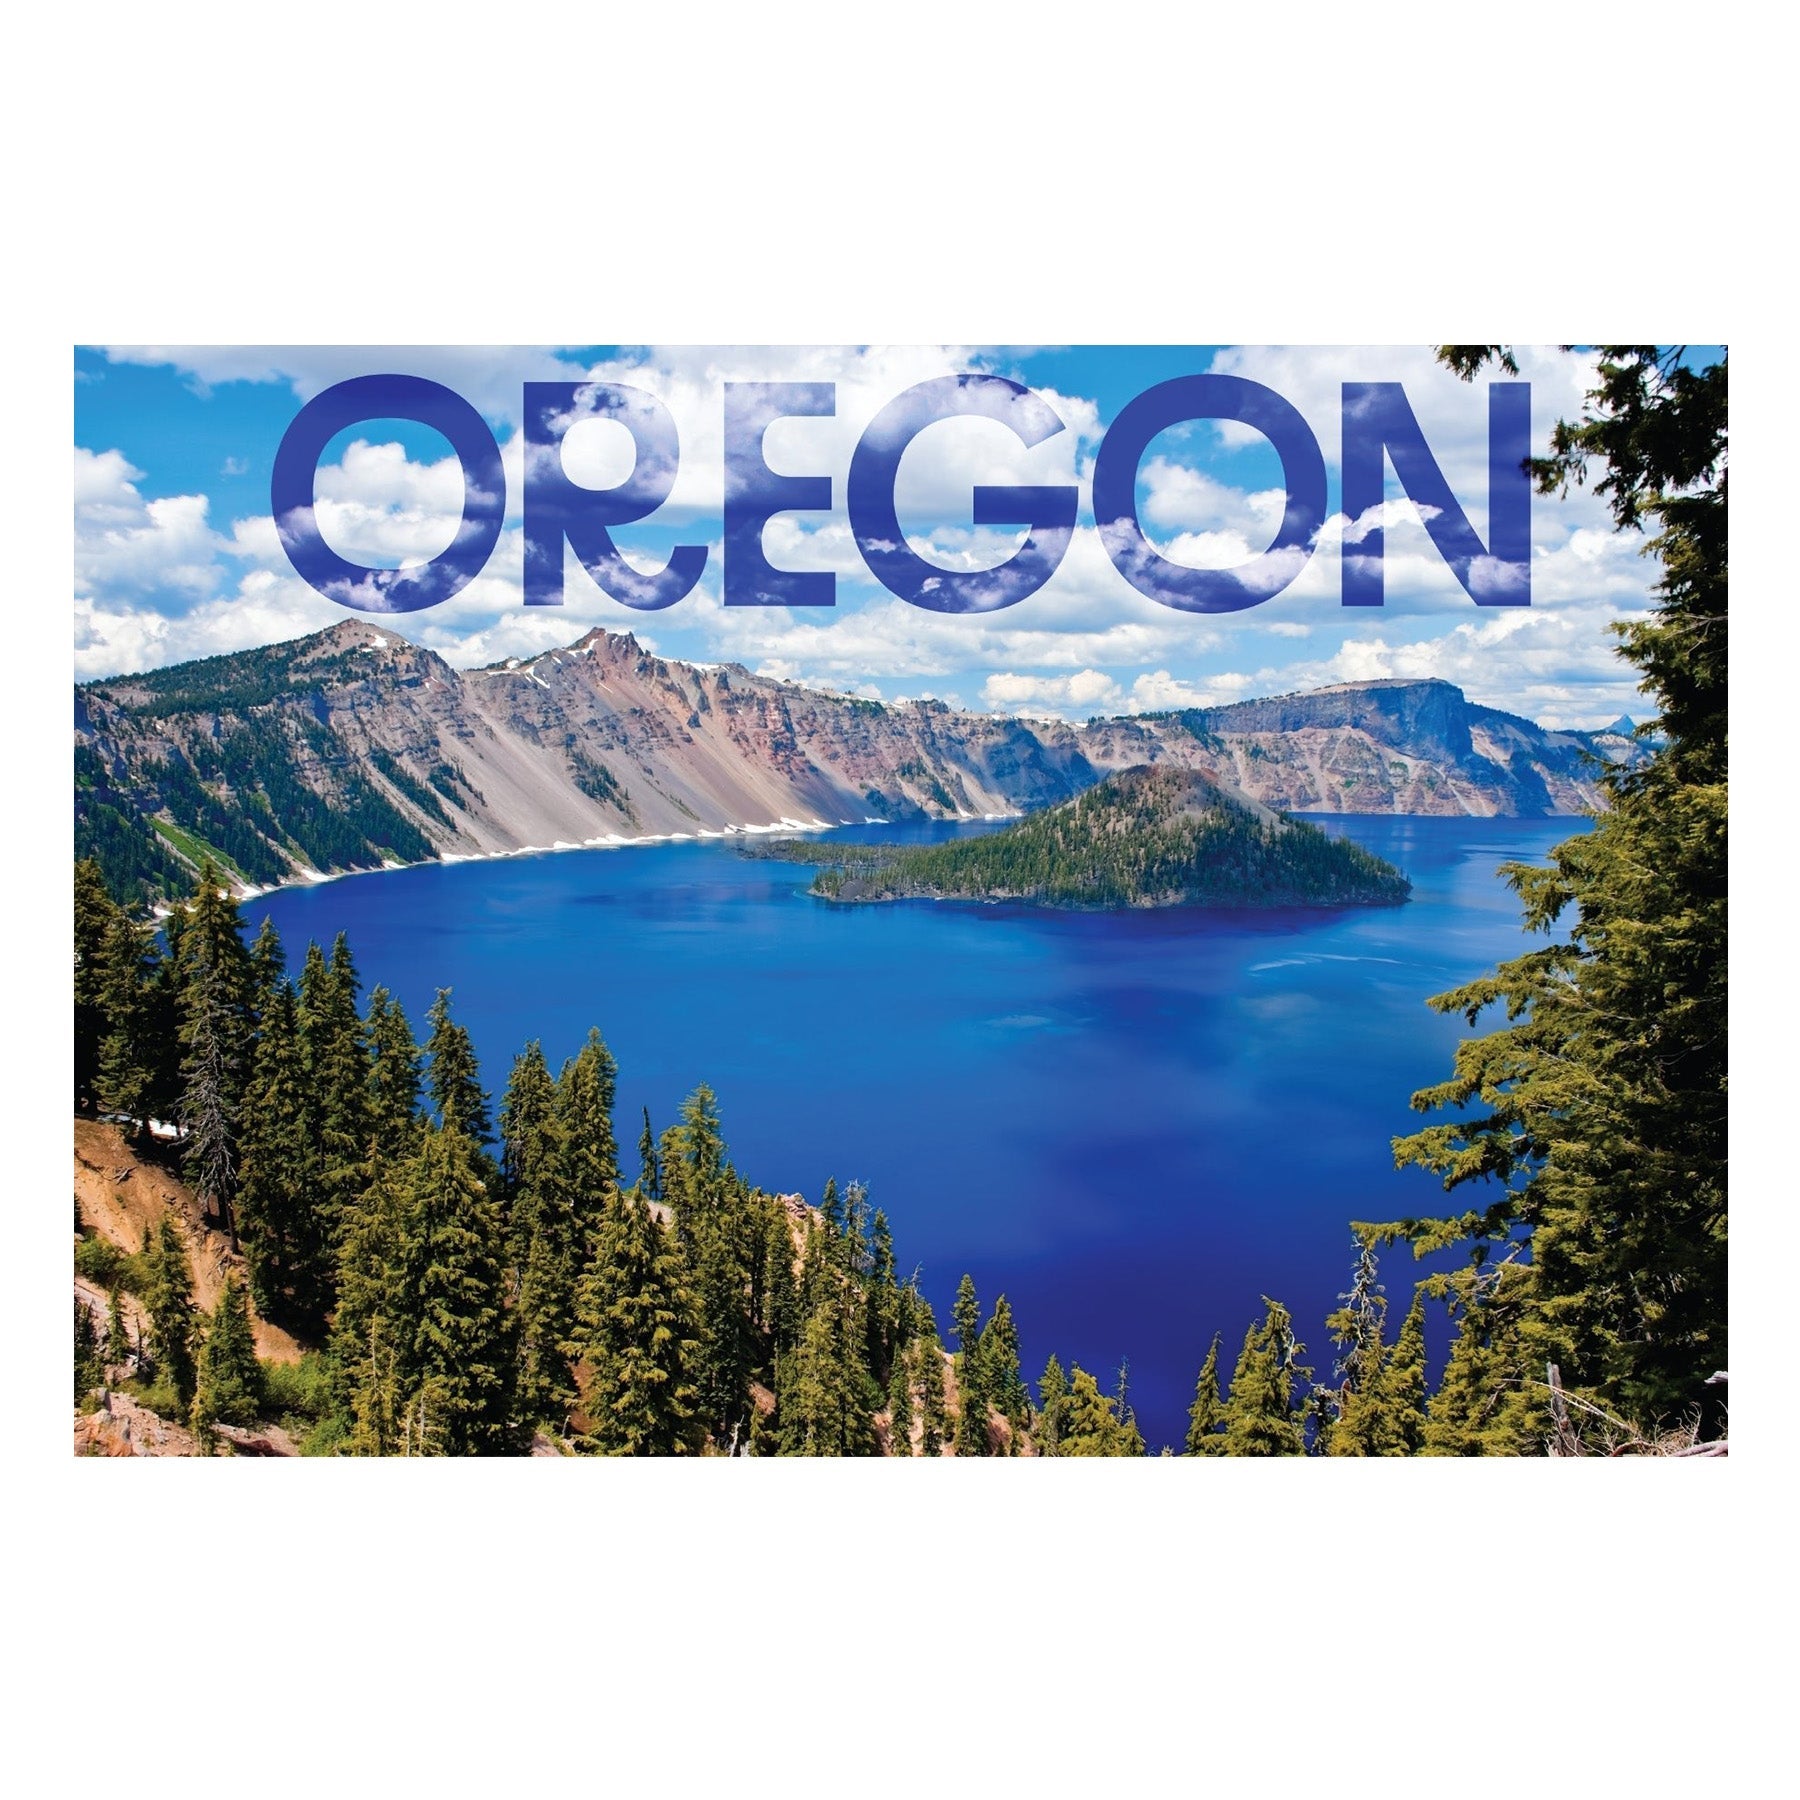 Crater Lake Clouds Postcard - Postcards - Hello From Oregon